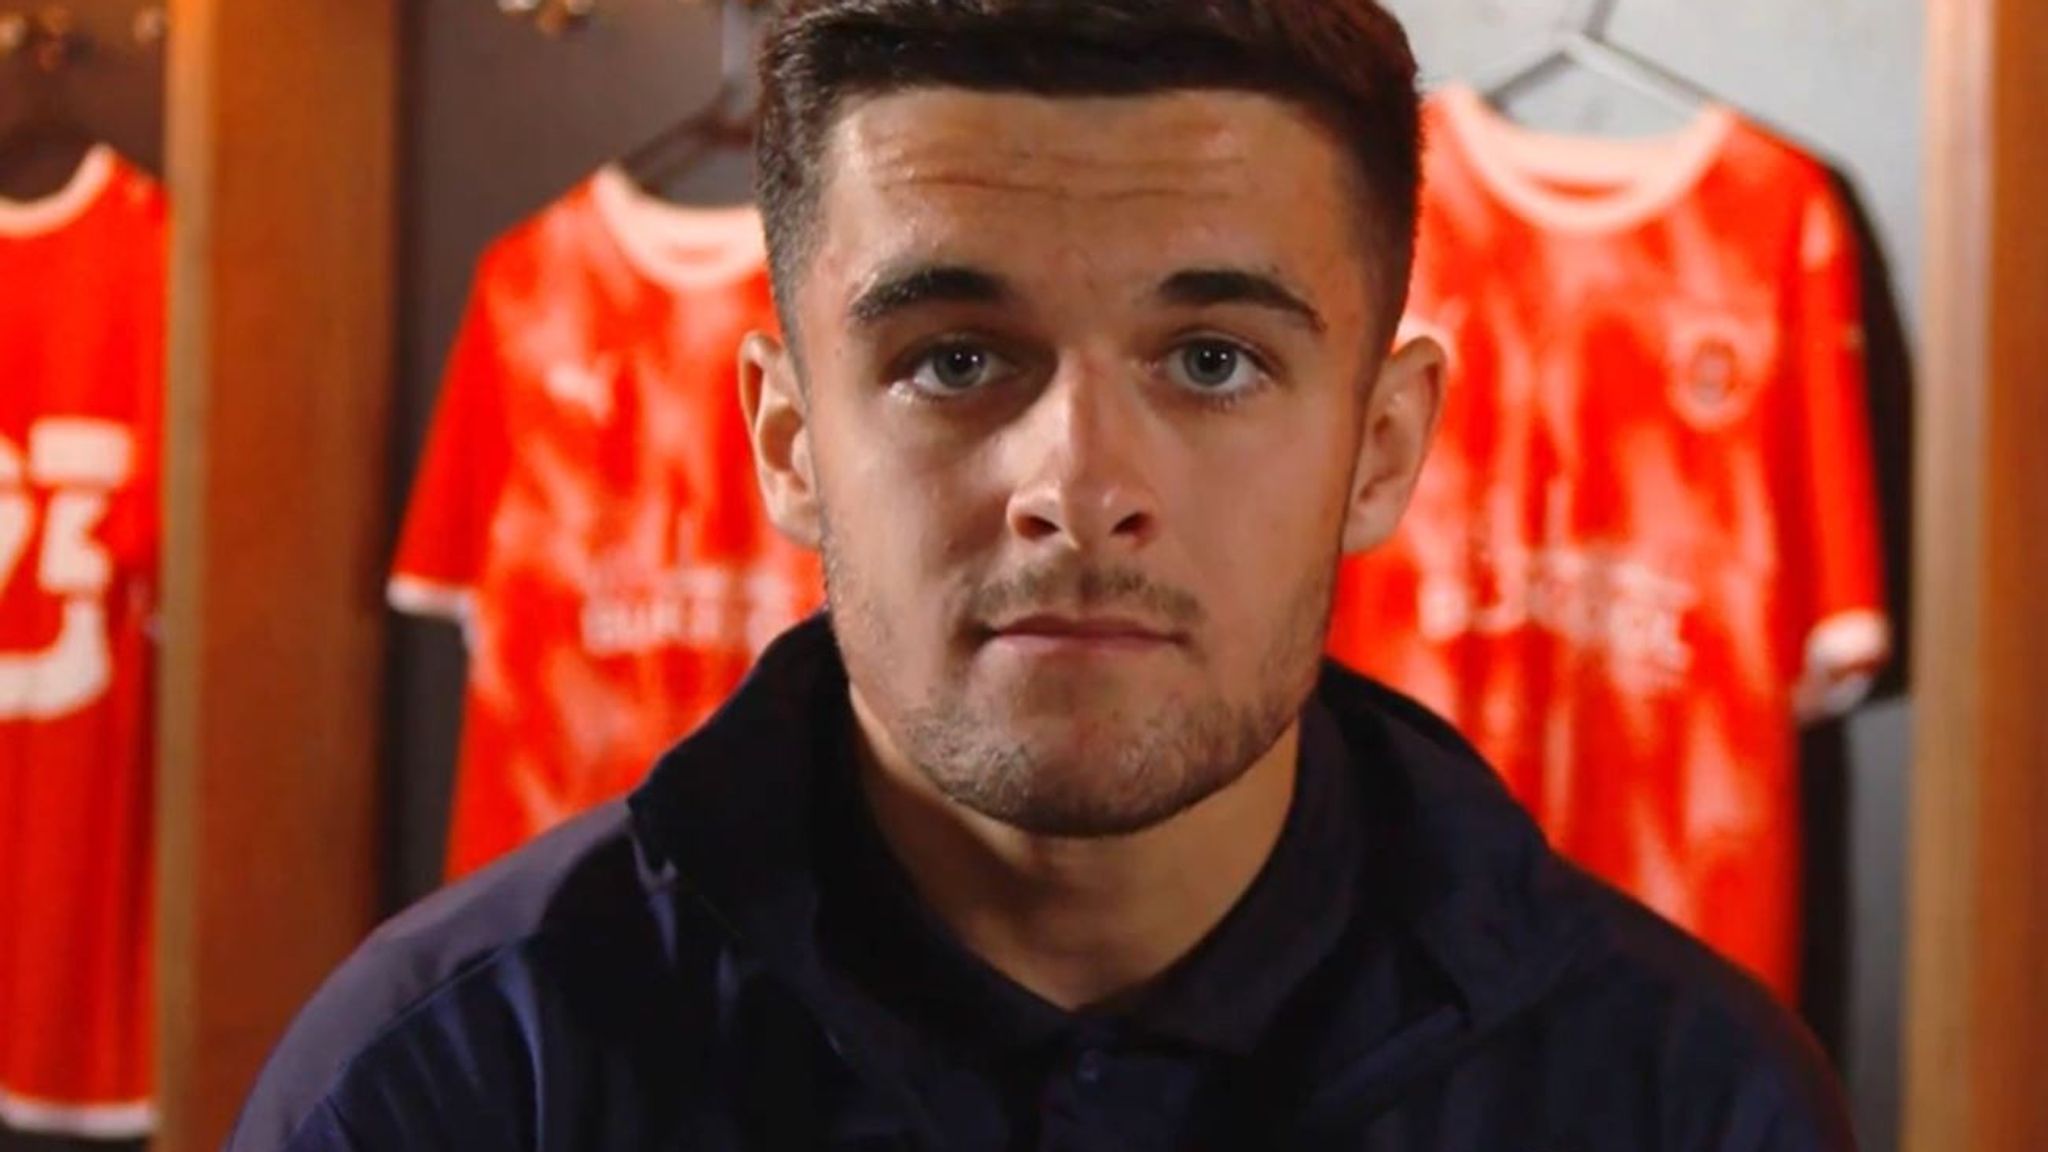 Jake Daniels Blackpool forward becomes UKs first active male professional footballer to come out publicly as gay Football News Sky Sports